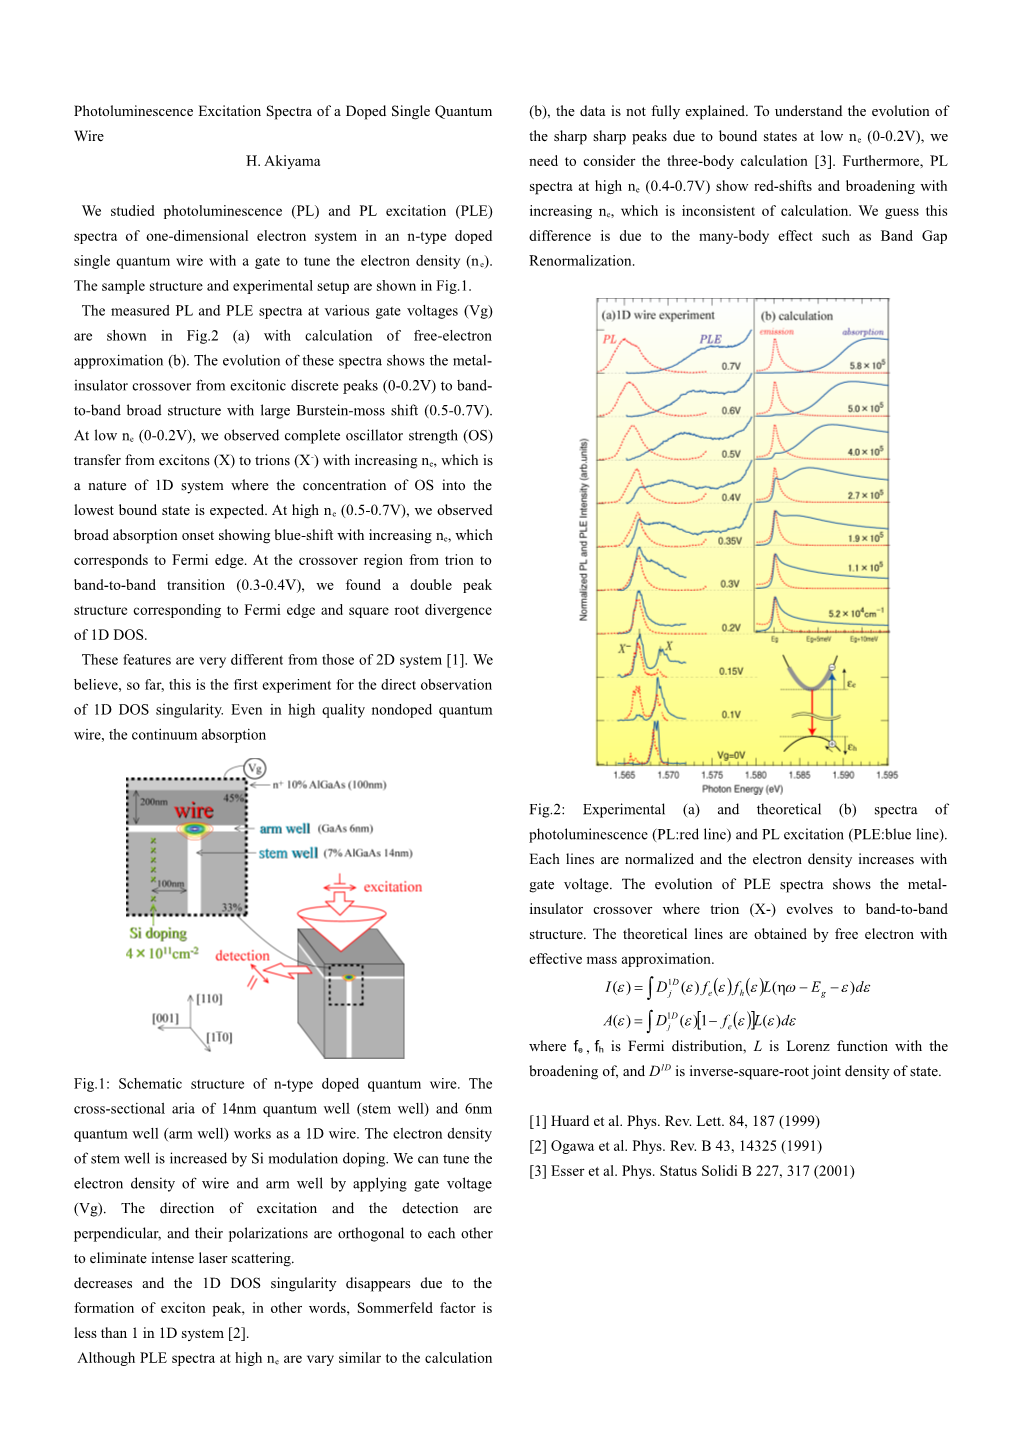 Photoluminescence Excitation Spectra of a Doped Single Quantum Wire